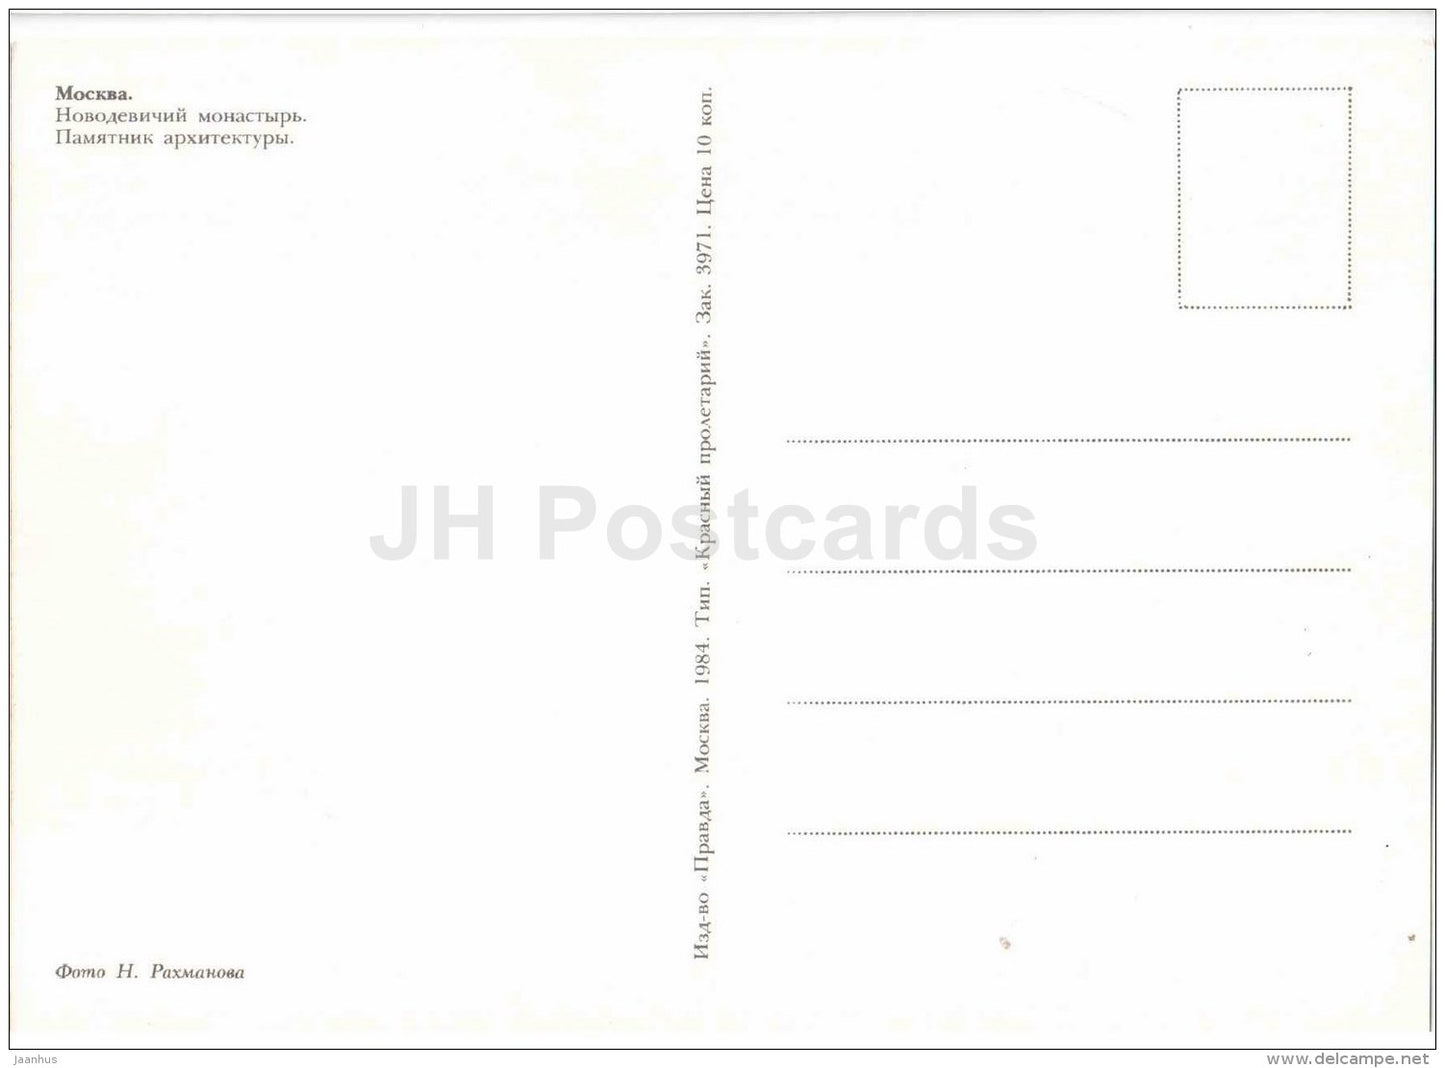 Novodevichy Convent - monastery - architectural monument - bus Ikarus - Moscow - 1984 - Russia USSR - unused - JH Postcards